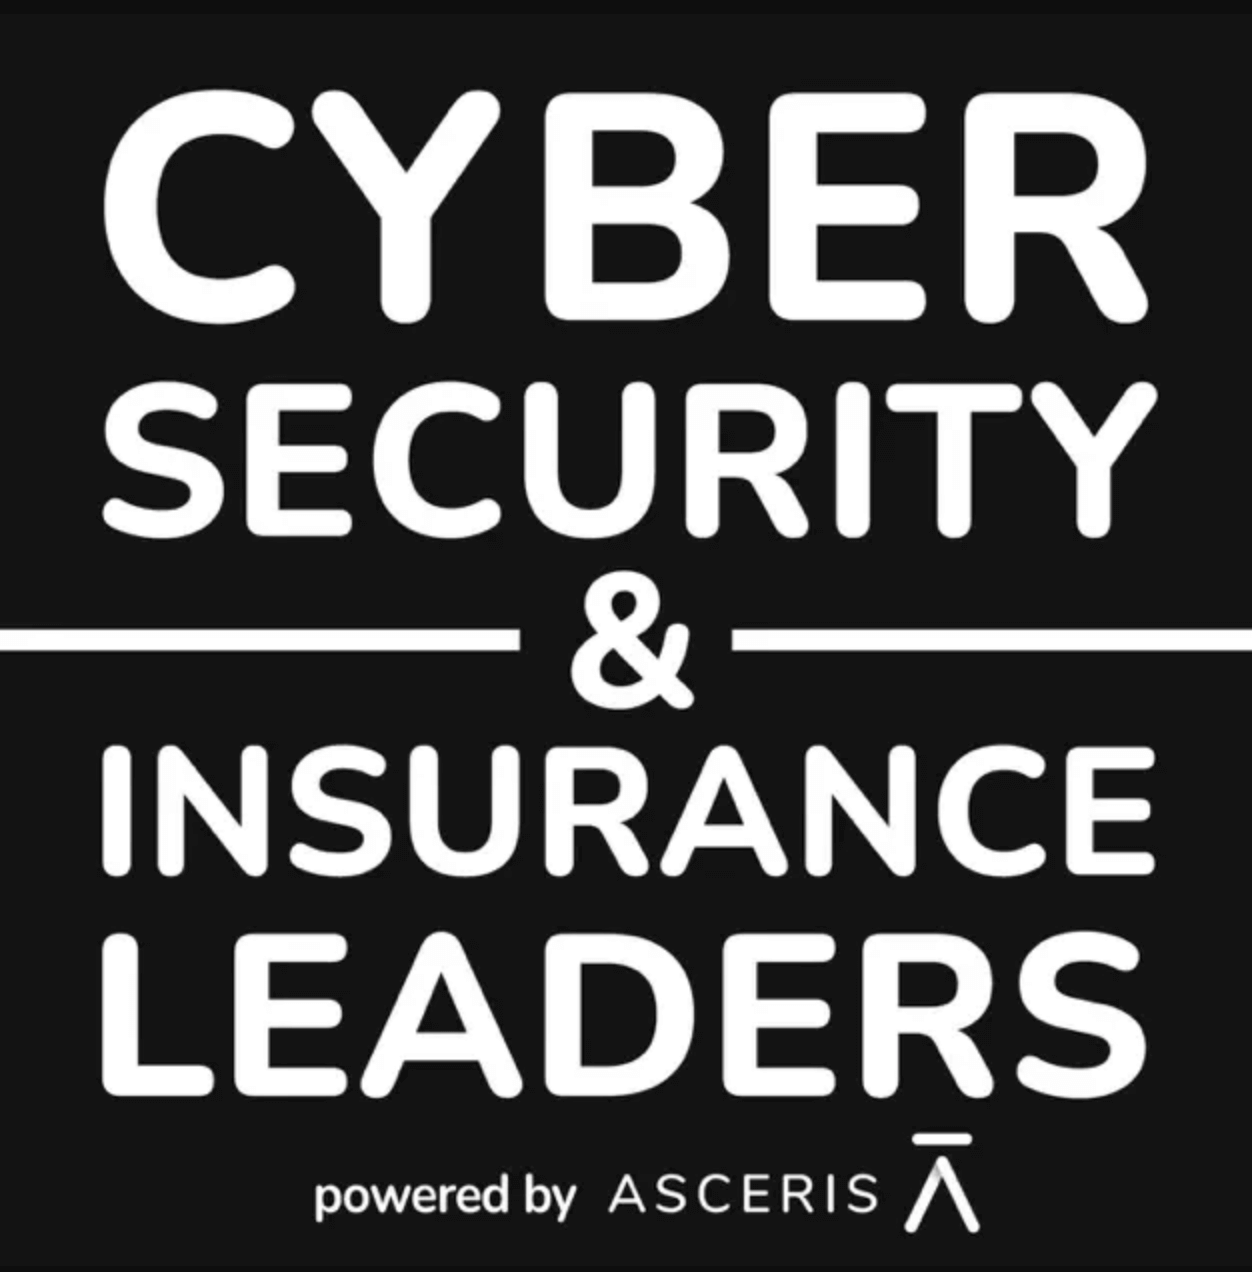 Cyber Security & Insurance Leaders podcast art with Powered by Asceris tagling